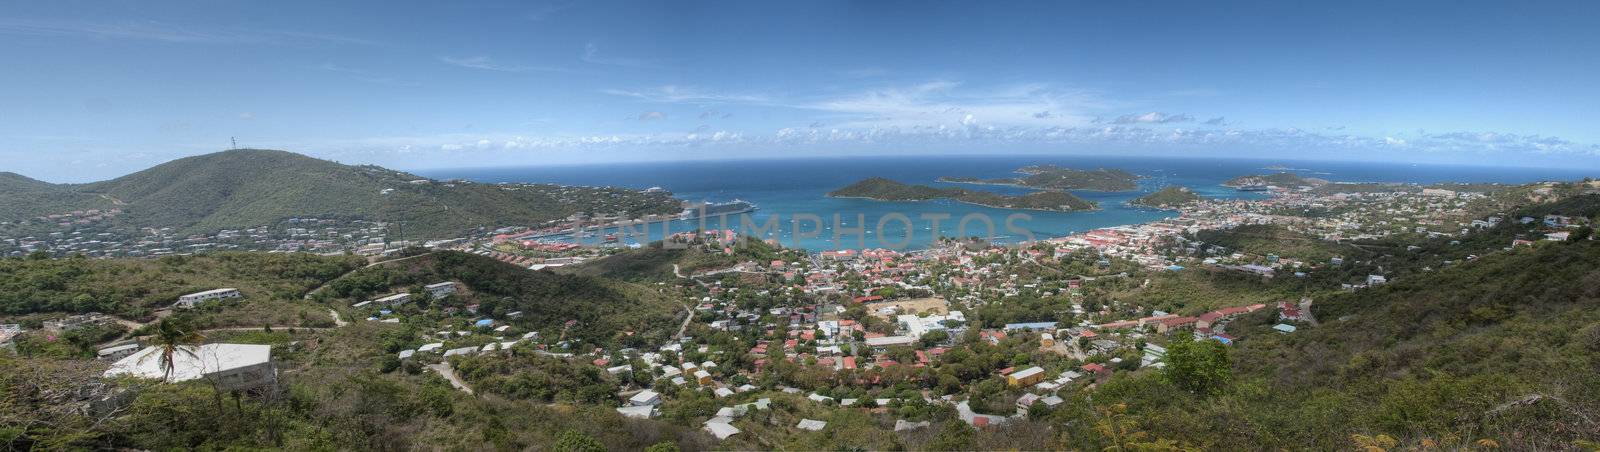 Saint Thomas from the Hill by jovannig